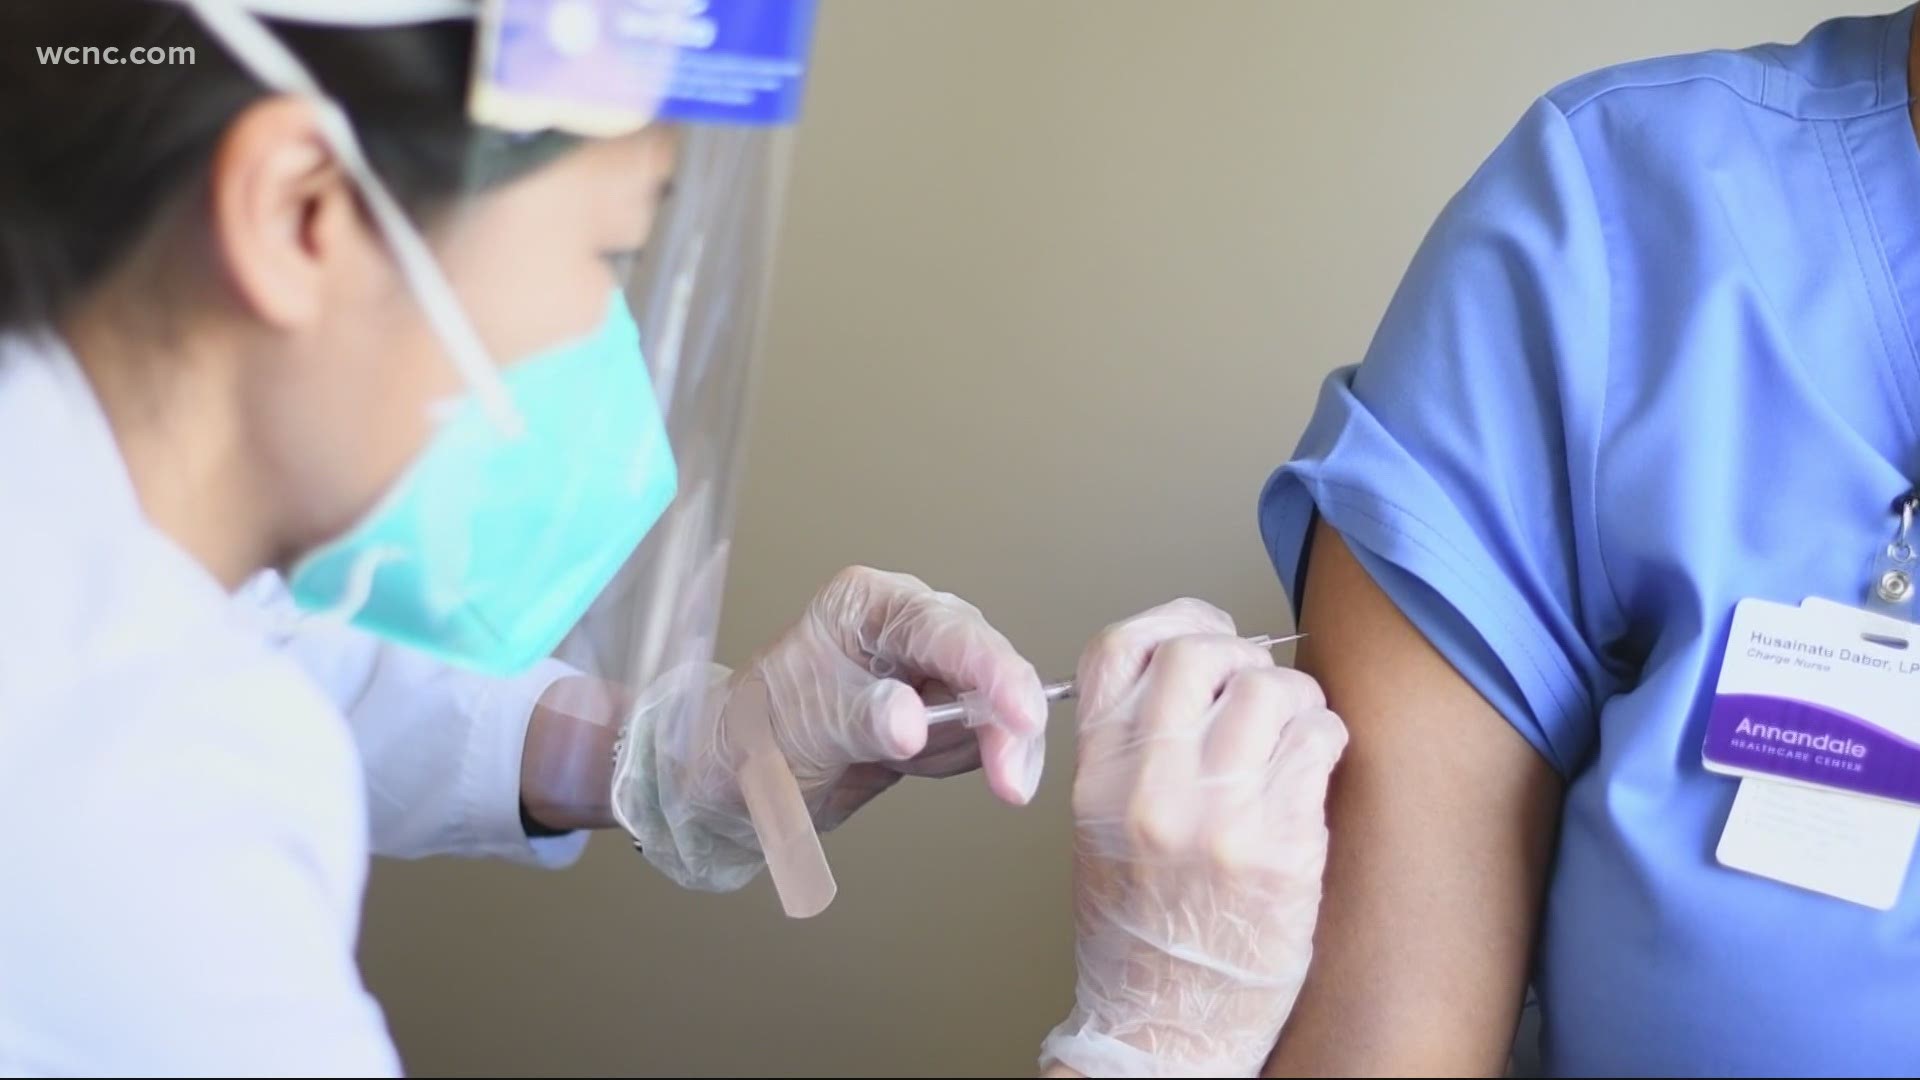 Some companies are offering incentives to workers to get the COVID-19 vaccine, but many people are wondering if their employer can require vaccination.